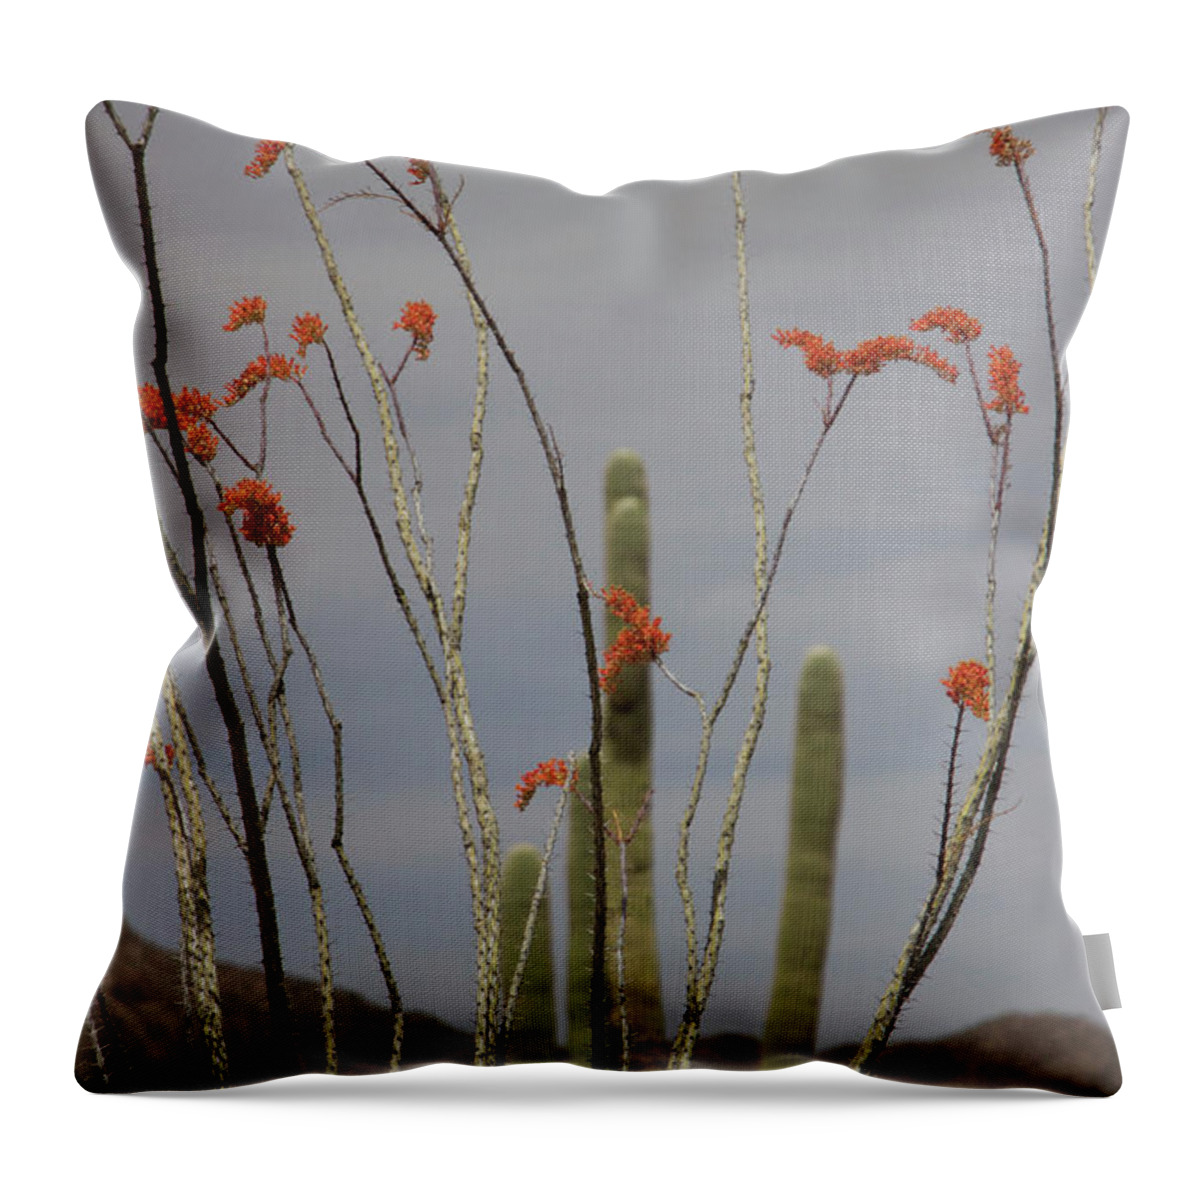  Throw Pillow featuring the photograph April by Eric Rosenwald